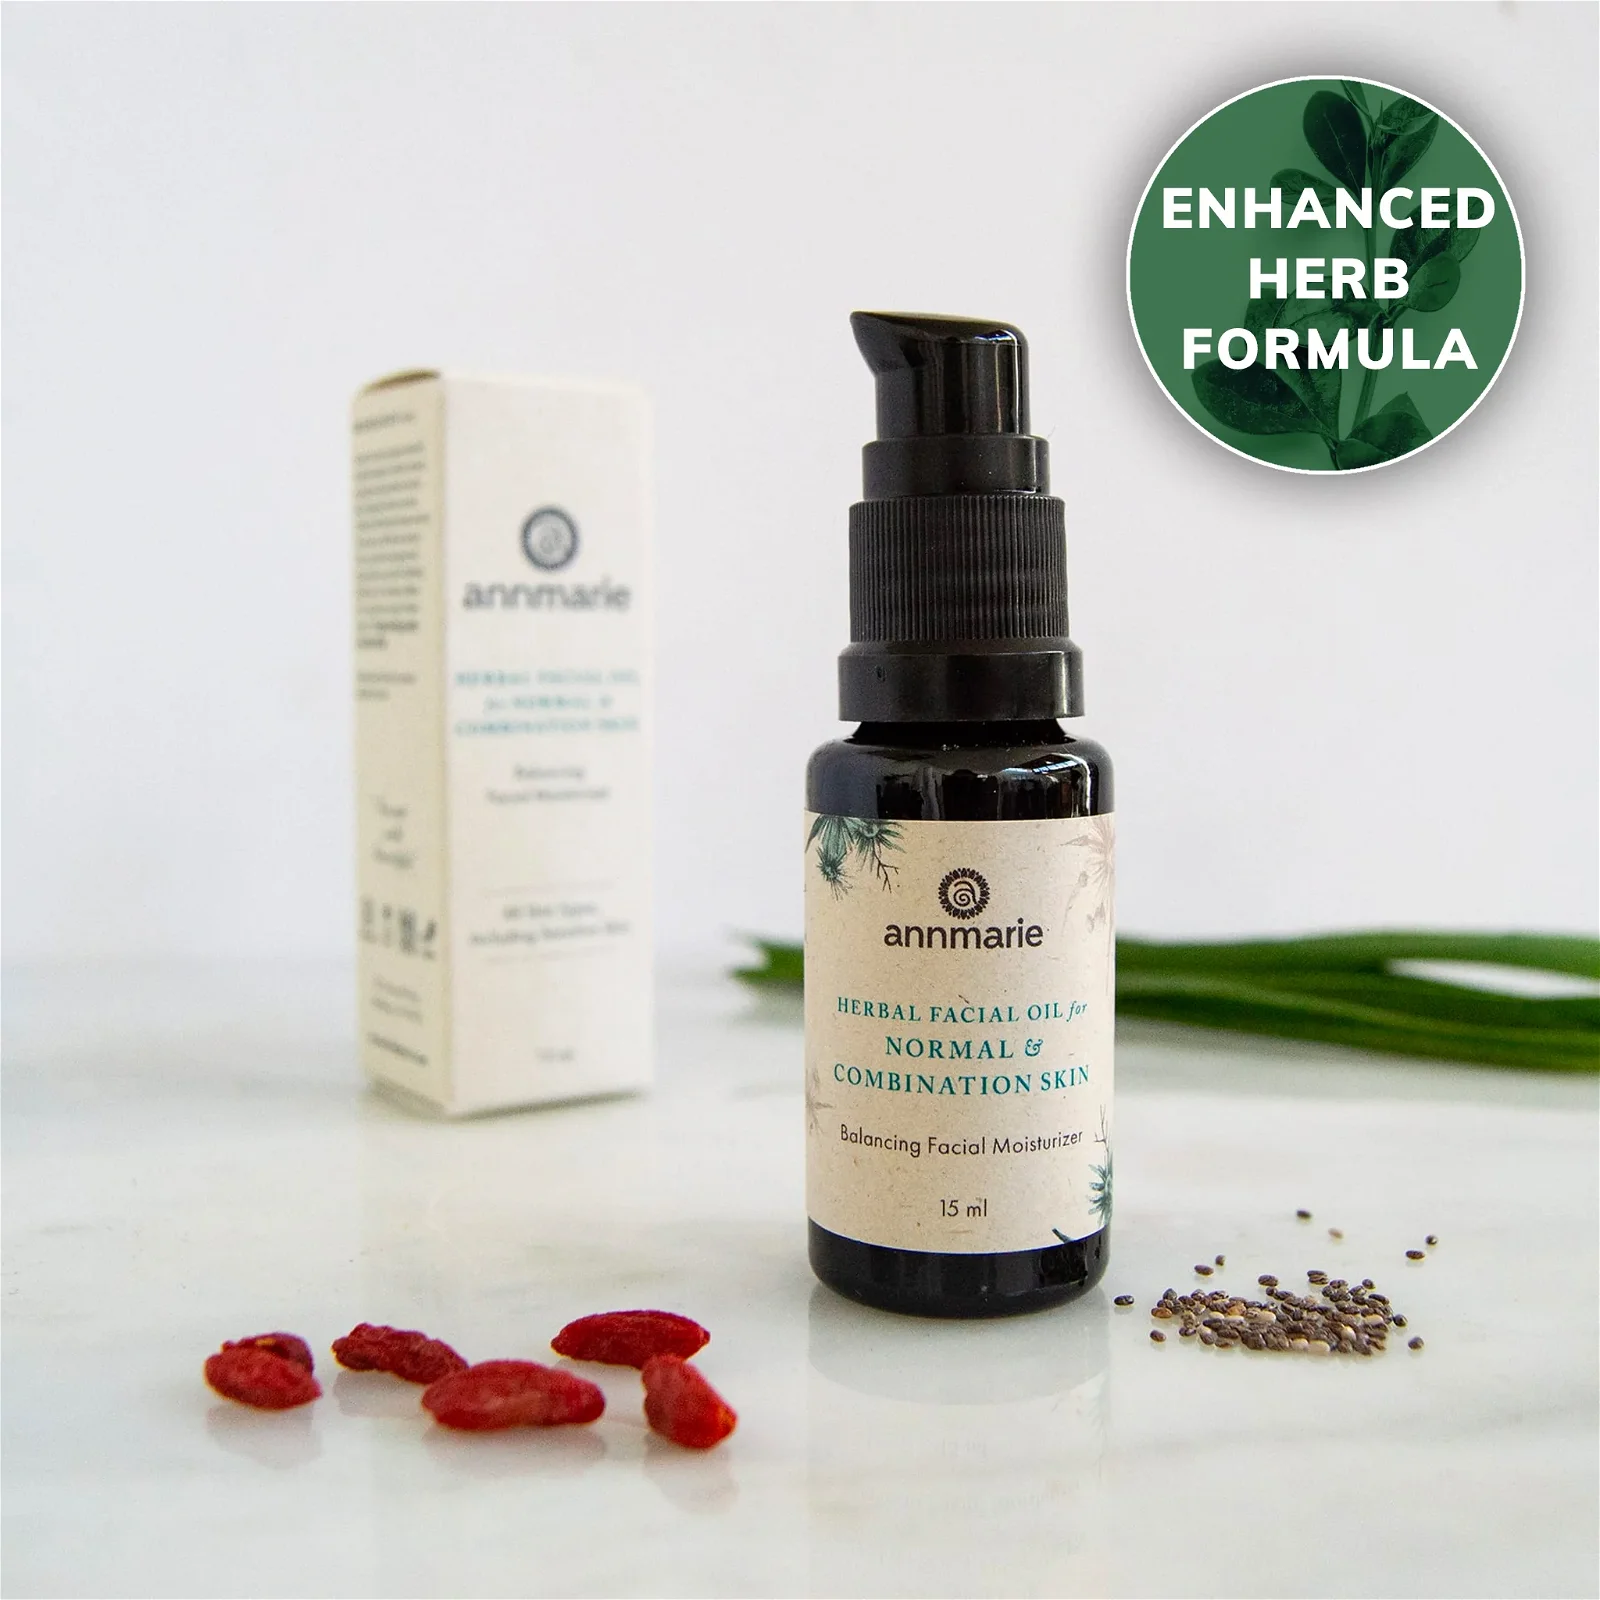 Image of Herbal Facial Oil for Normal & Combination Skin (15ml)